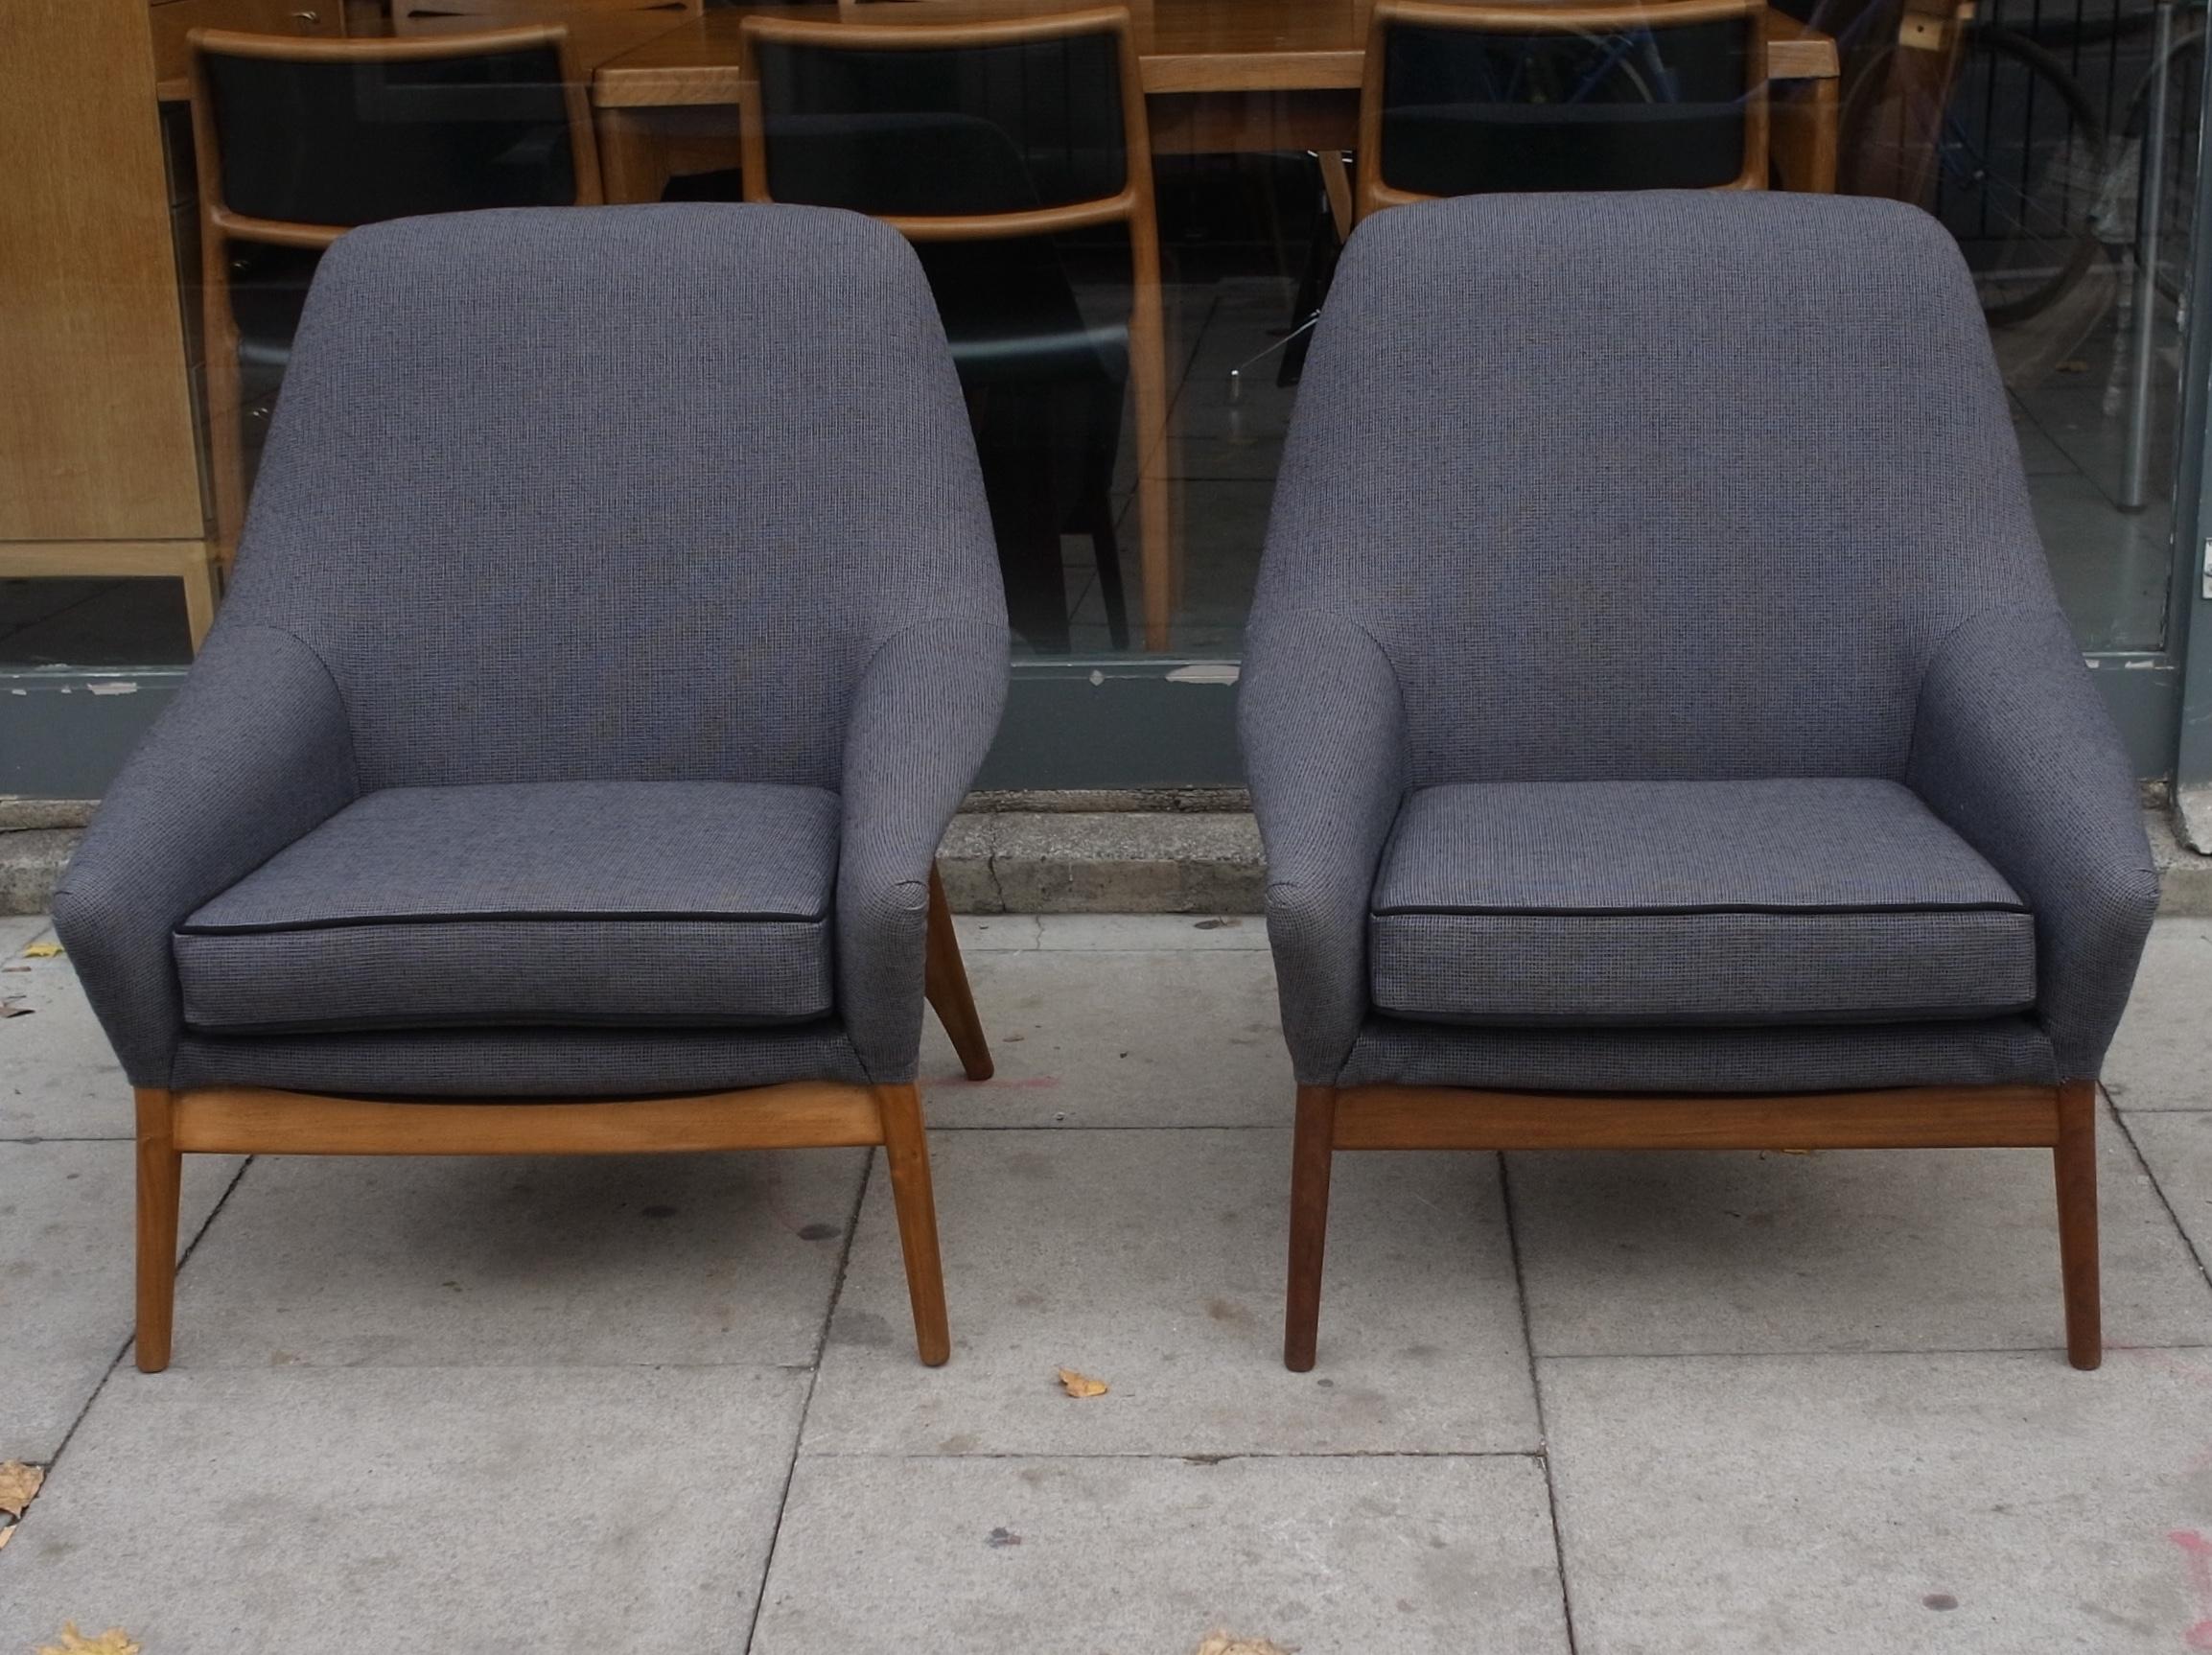 A very rare, comfortable and stylish pair of vintage 1950s English Park Knoll 'Maldon' armchairs, newly reupholstered in a grey and black 100% wool textile with black piping on the seat cushion, on an external Walnut framed base. These armchairs are